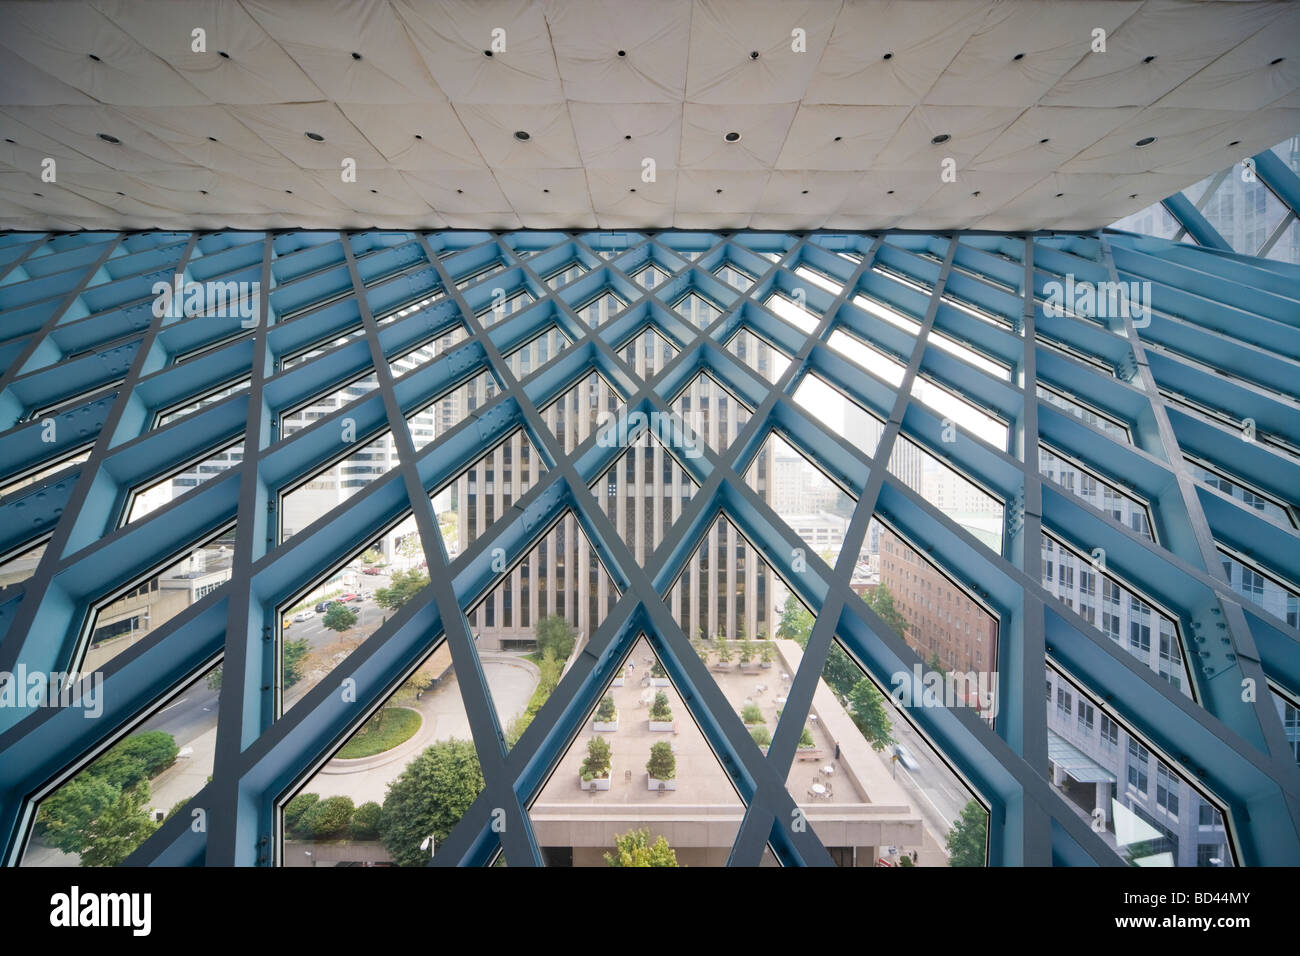 Seattle Central Library interior. View from level 10 through steel construction. Stock Photo